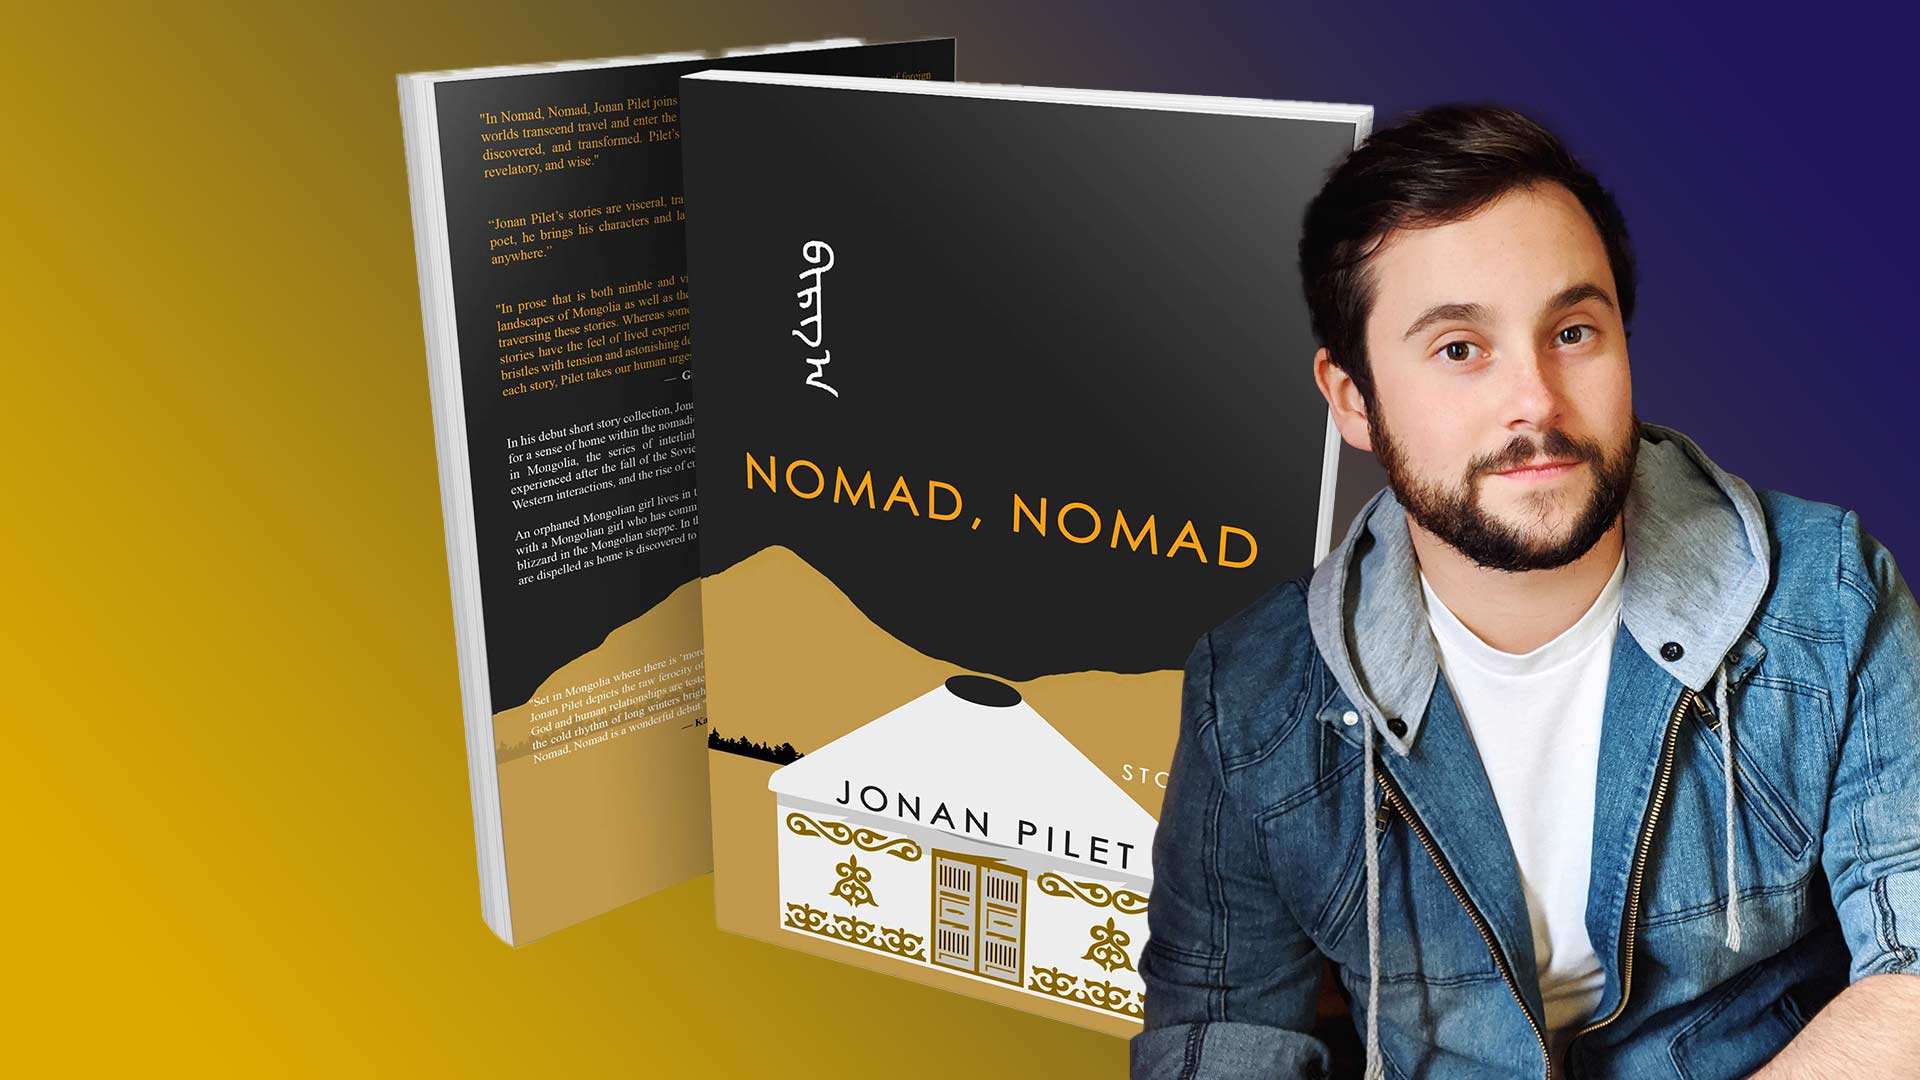 Jonan Pilet with his book Nomad, Nomad